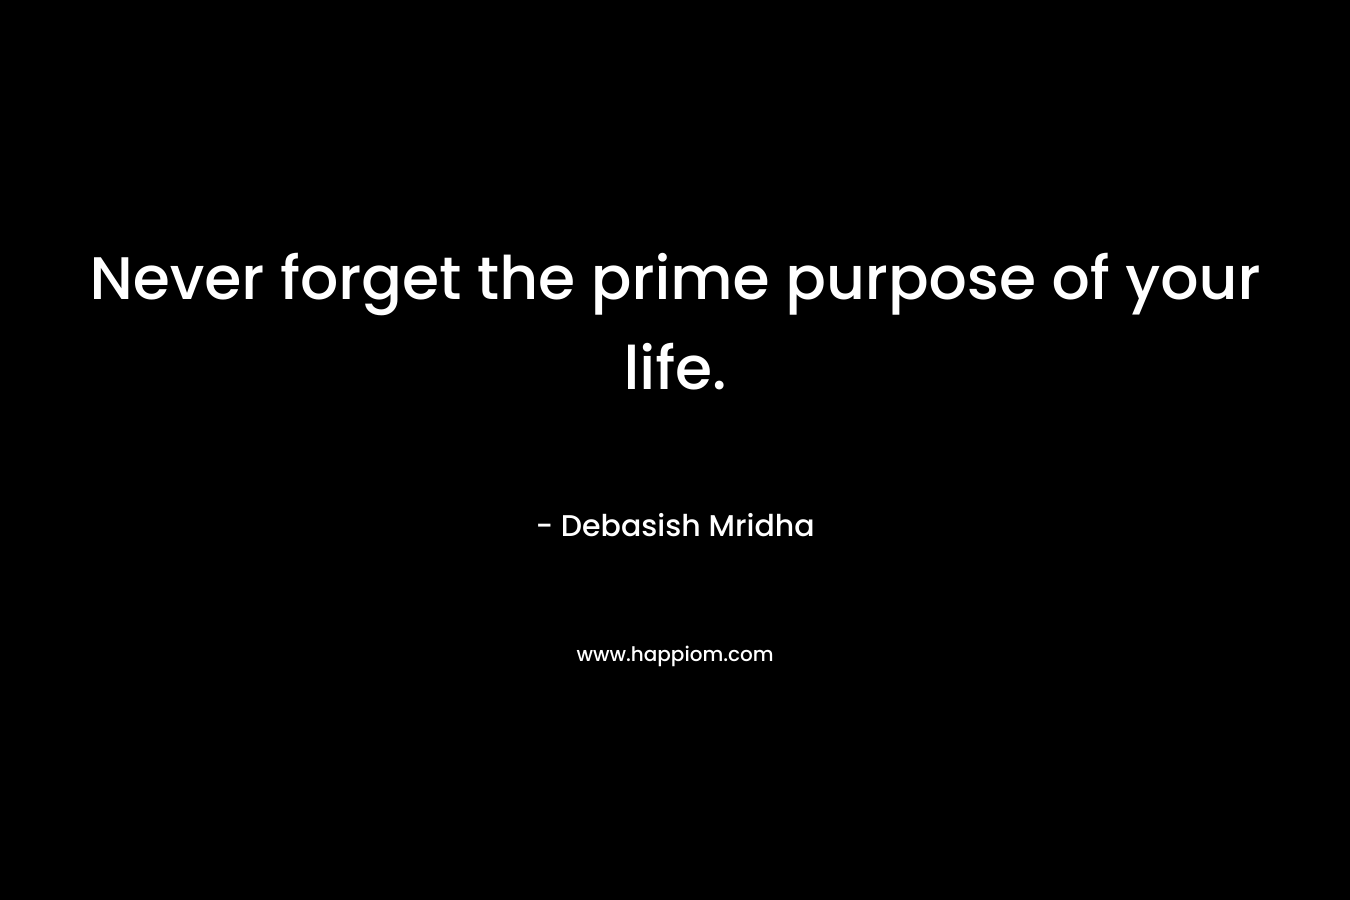 Never forget the prime purpose of your life.